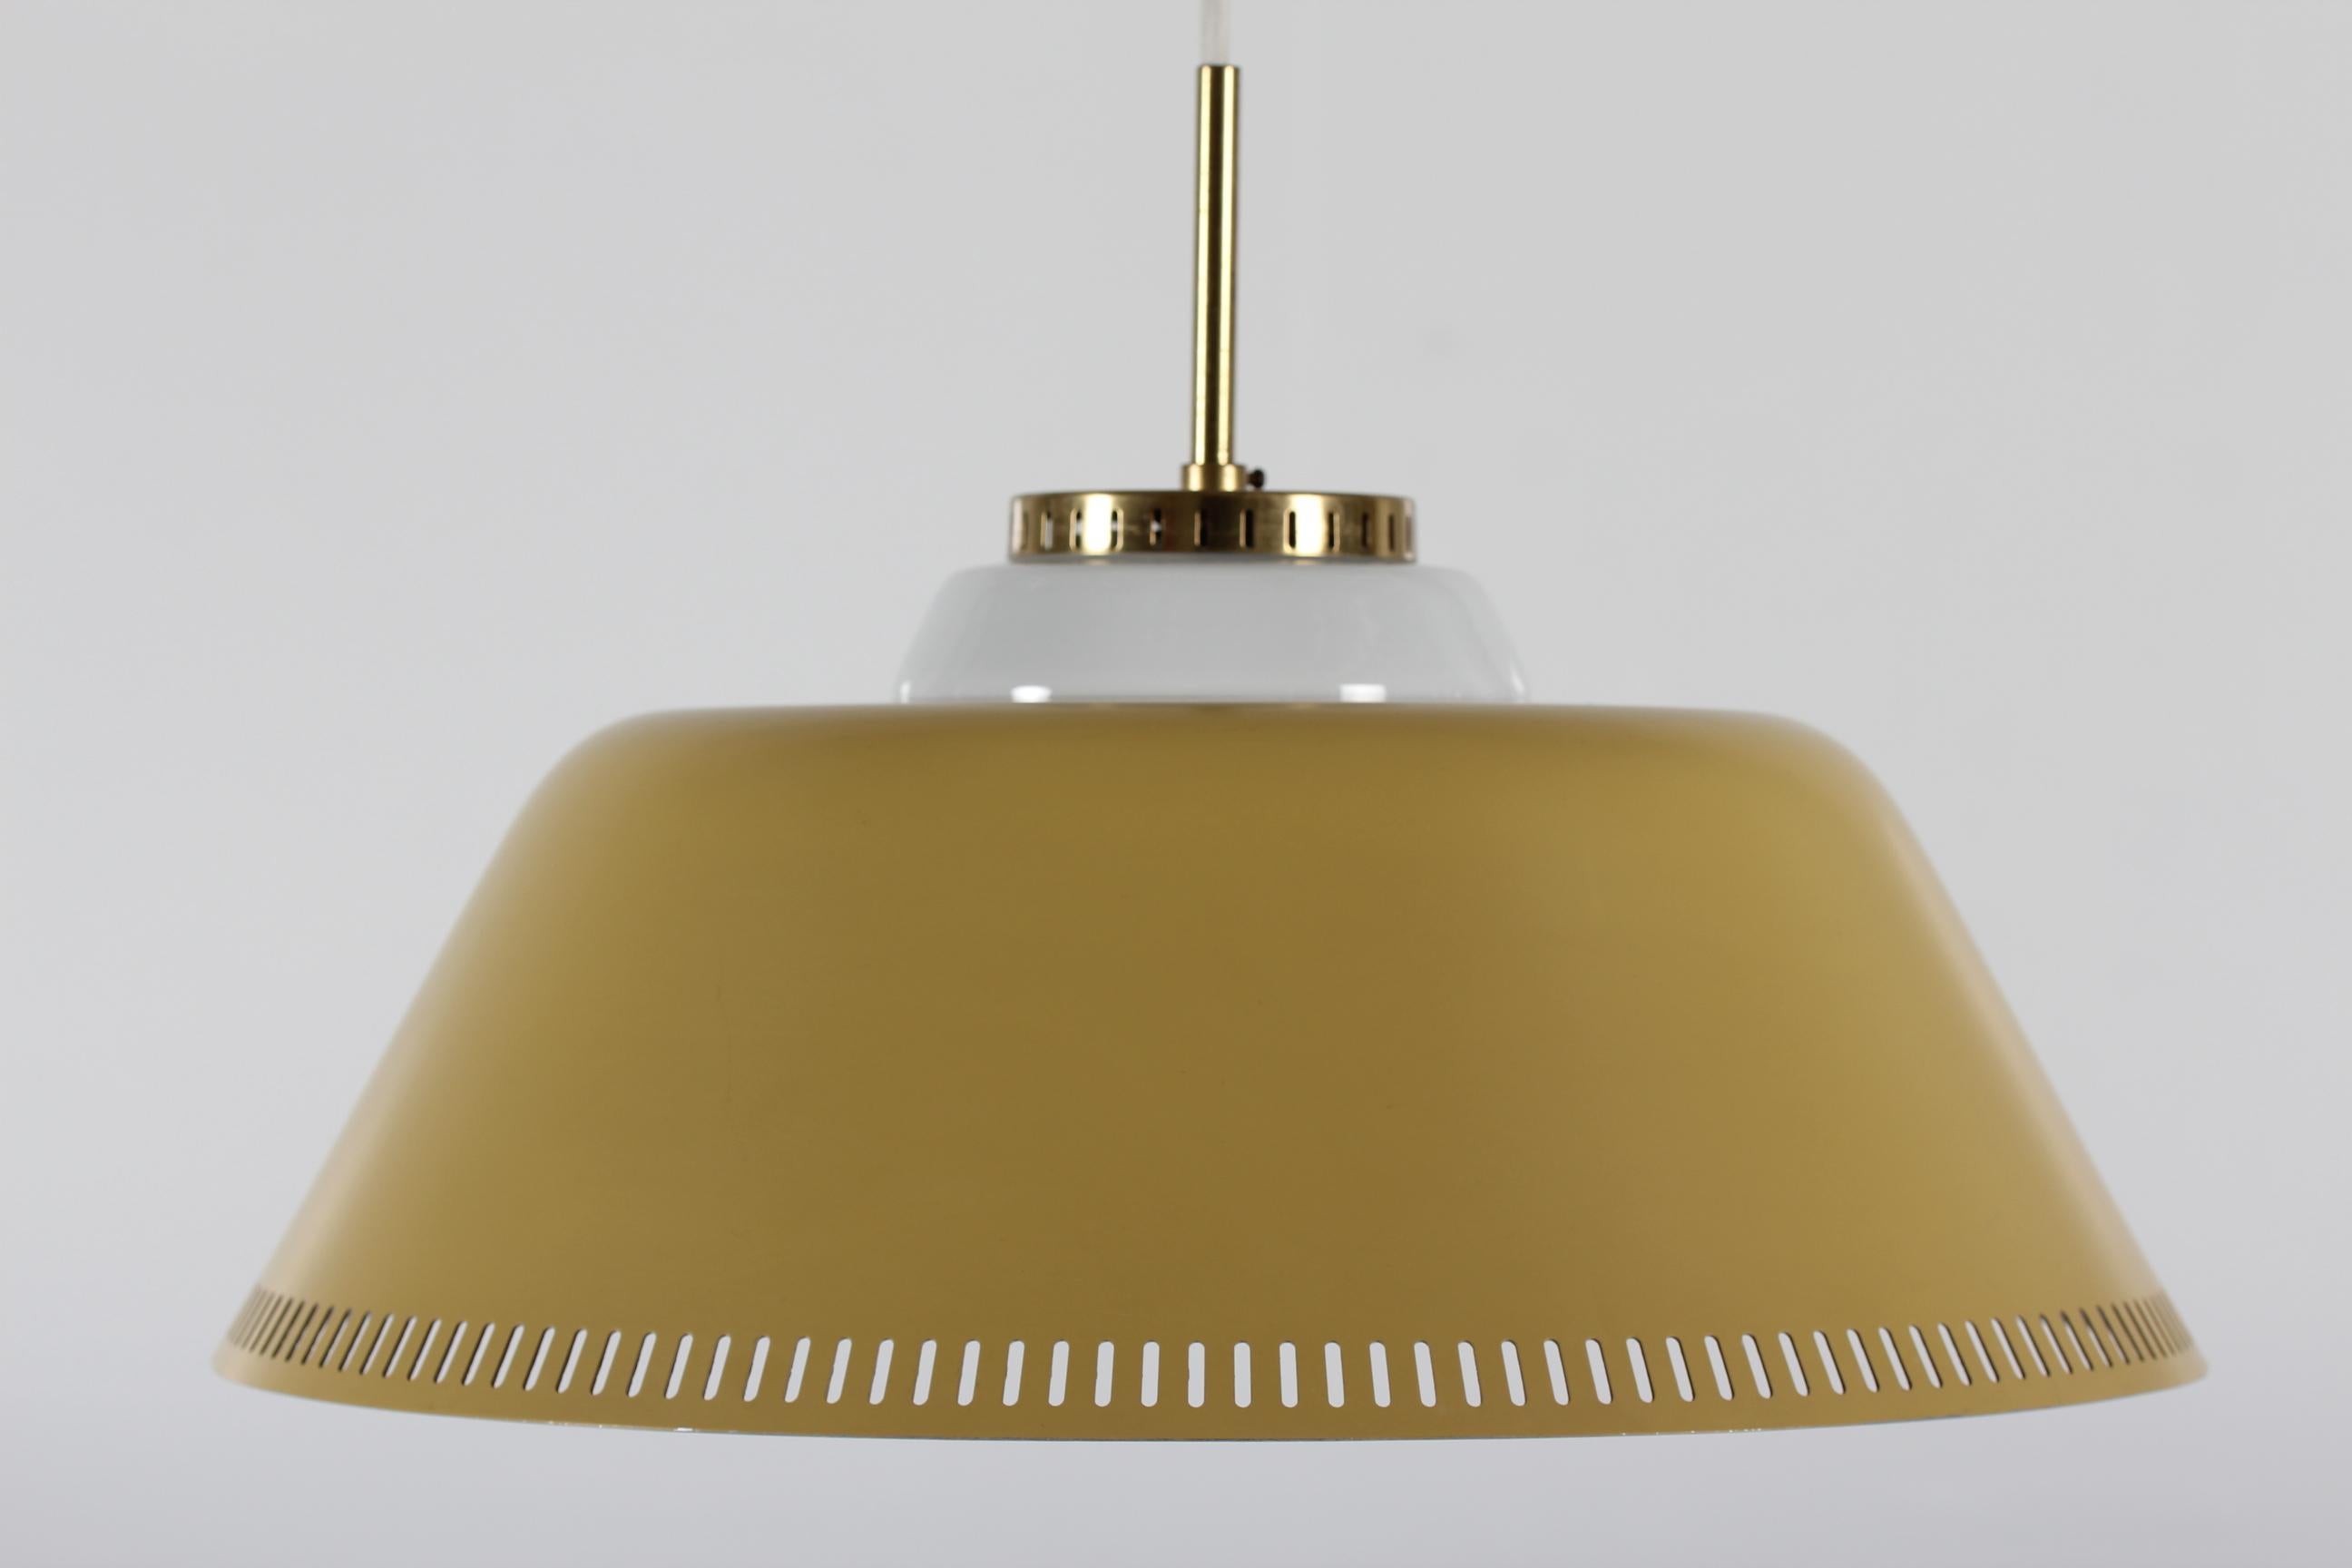 Large modernist pendant light attributed to Bent Karlby and presumably made by Lyfa.
The metal pendant has a dusty yellow lacquer on the outside and the inside is shiny metal. The top is made of brass with lacquer.
A milky white glass inset cover